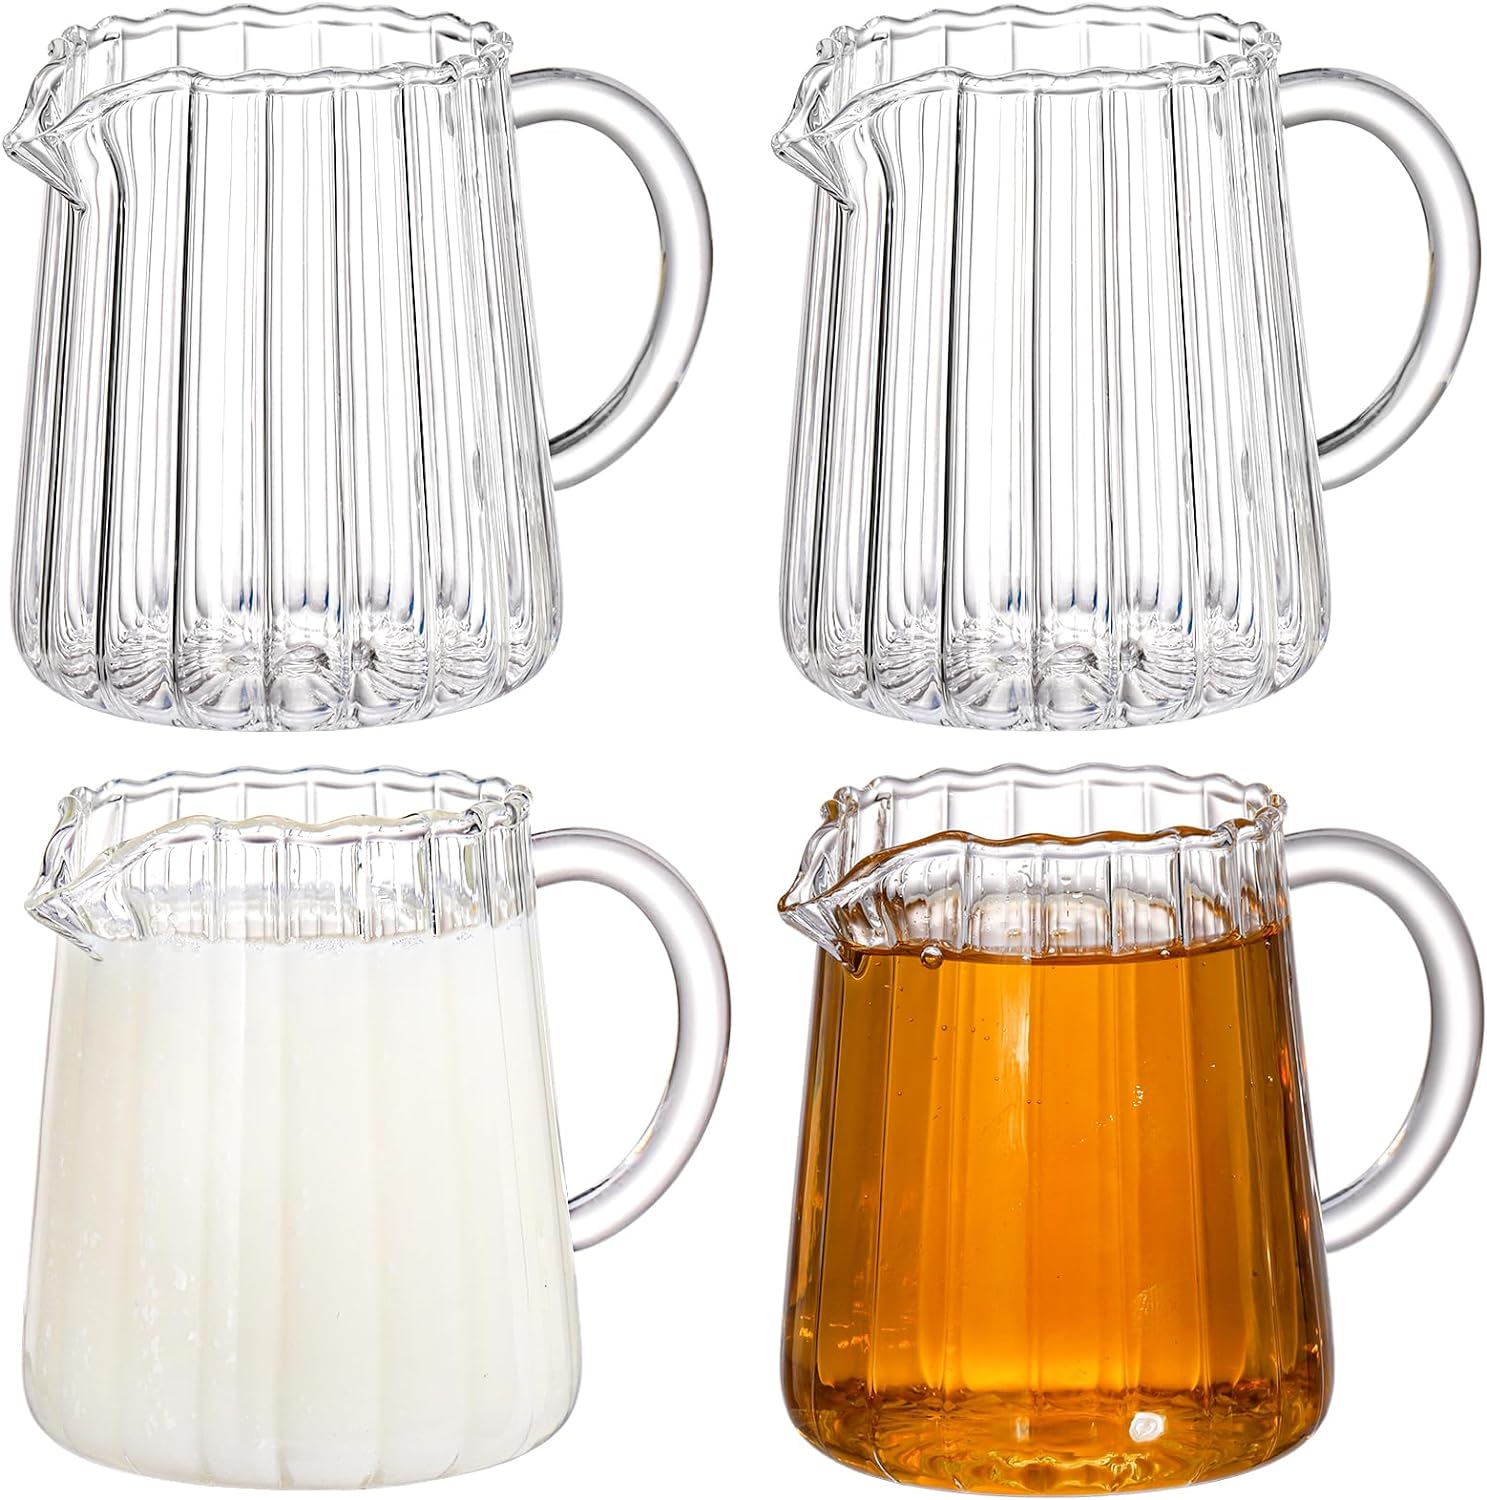 Yarlung 4 Pack Small Glass Pitcher, 8.5 Oz Crystal Clear Coffee Milk Creamer with Handle, Creative Tea Pitcher Fair Cups for Table Serving, Salad Sauce, Elegant Wave Shaped